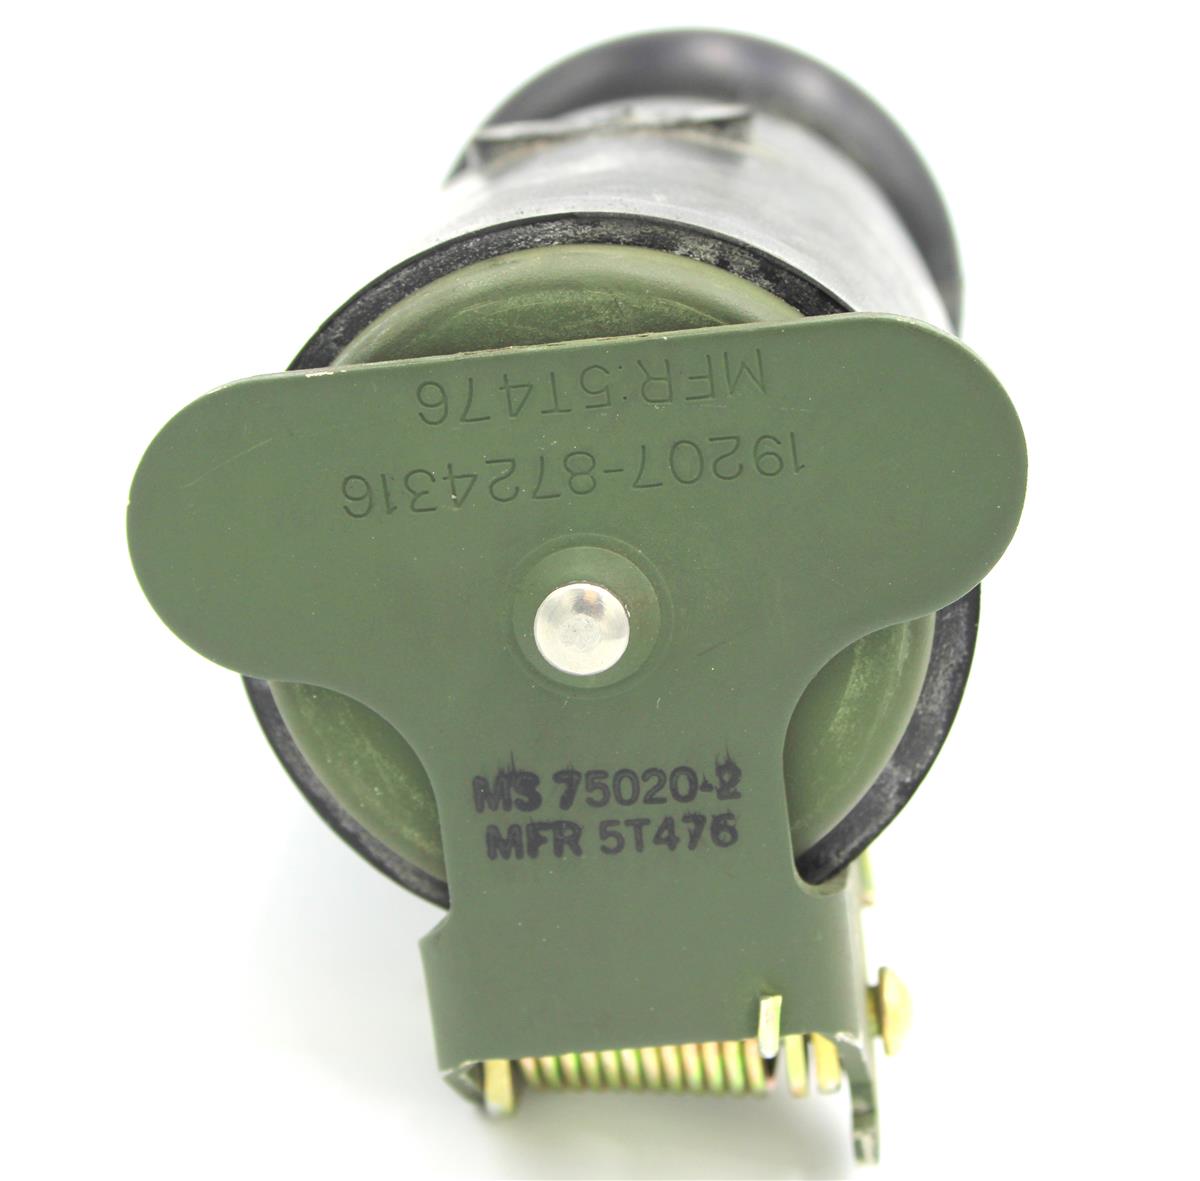 TR-342 | TR-342 Trailer Wiring Connector Plug (Female) Military Common Application (1).JPG